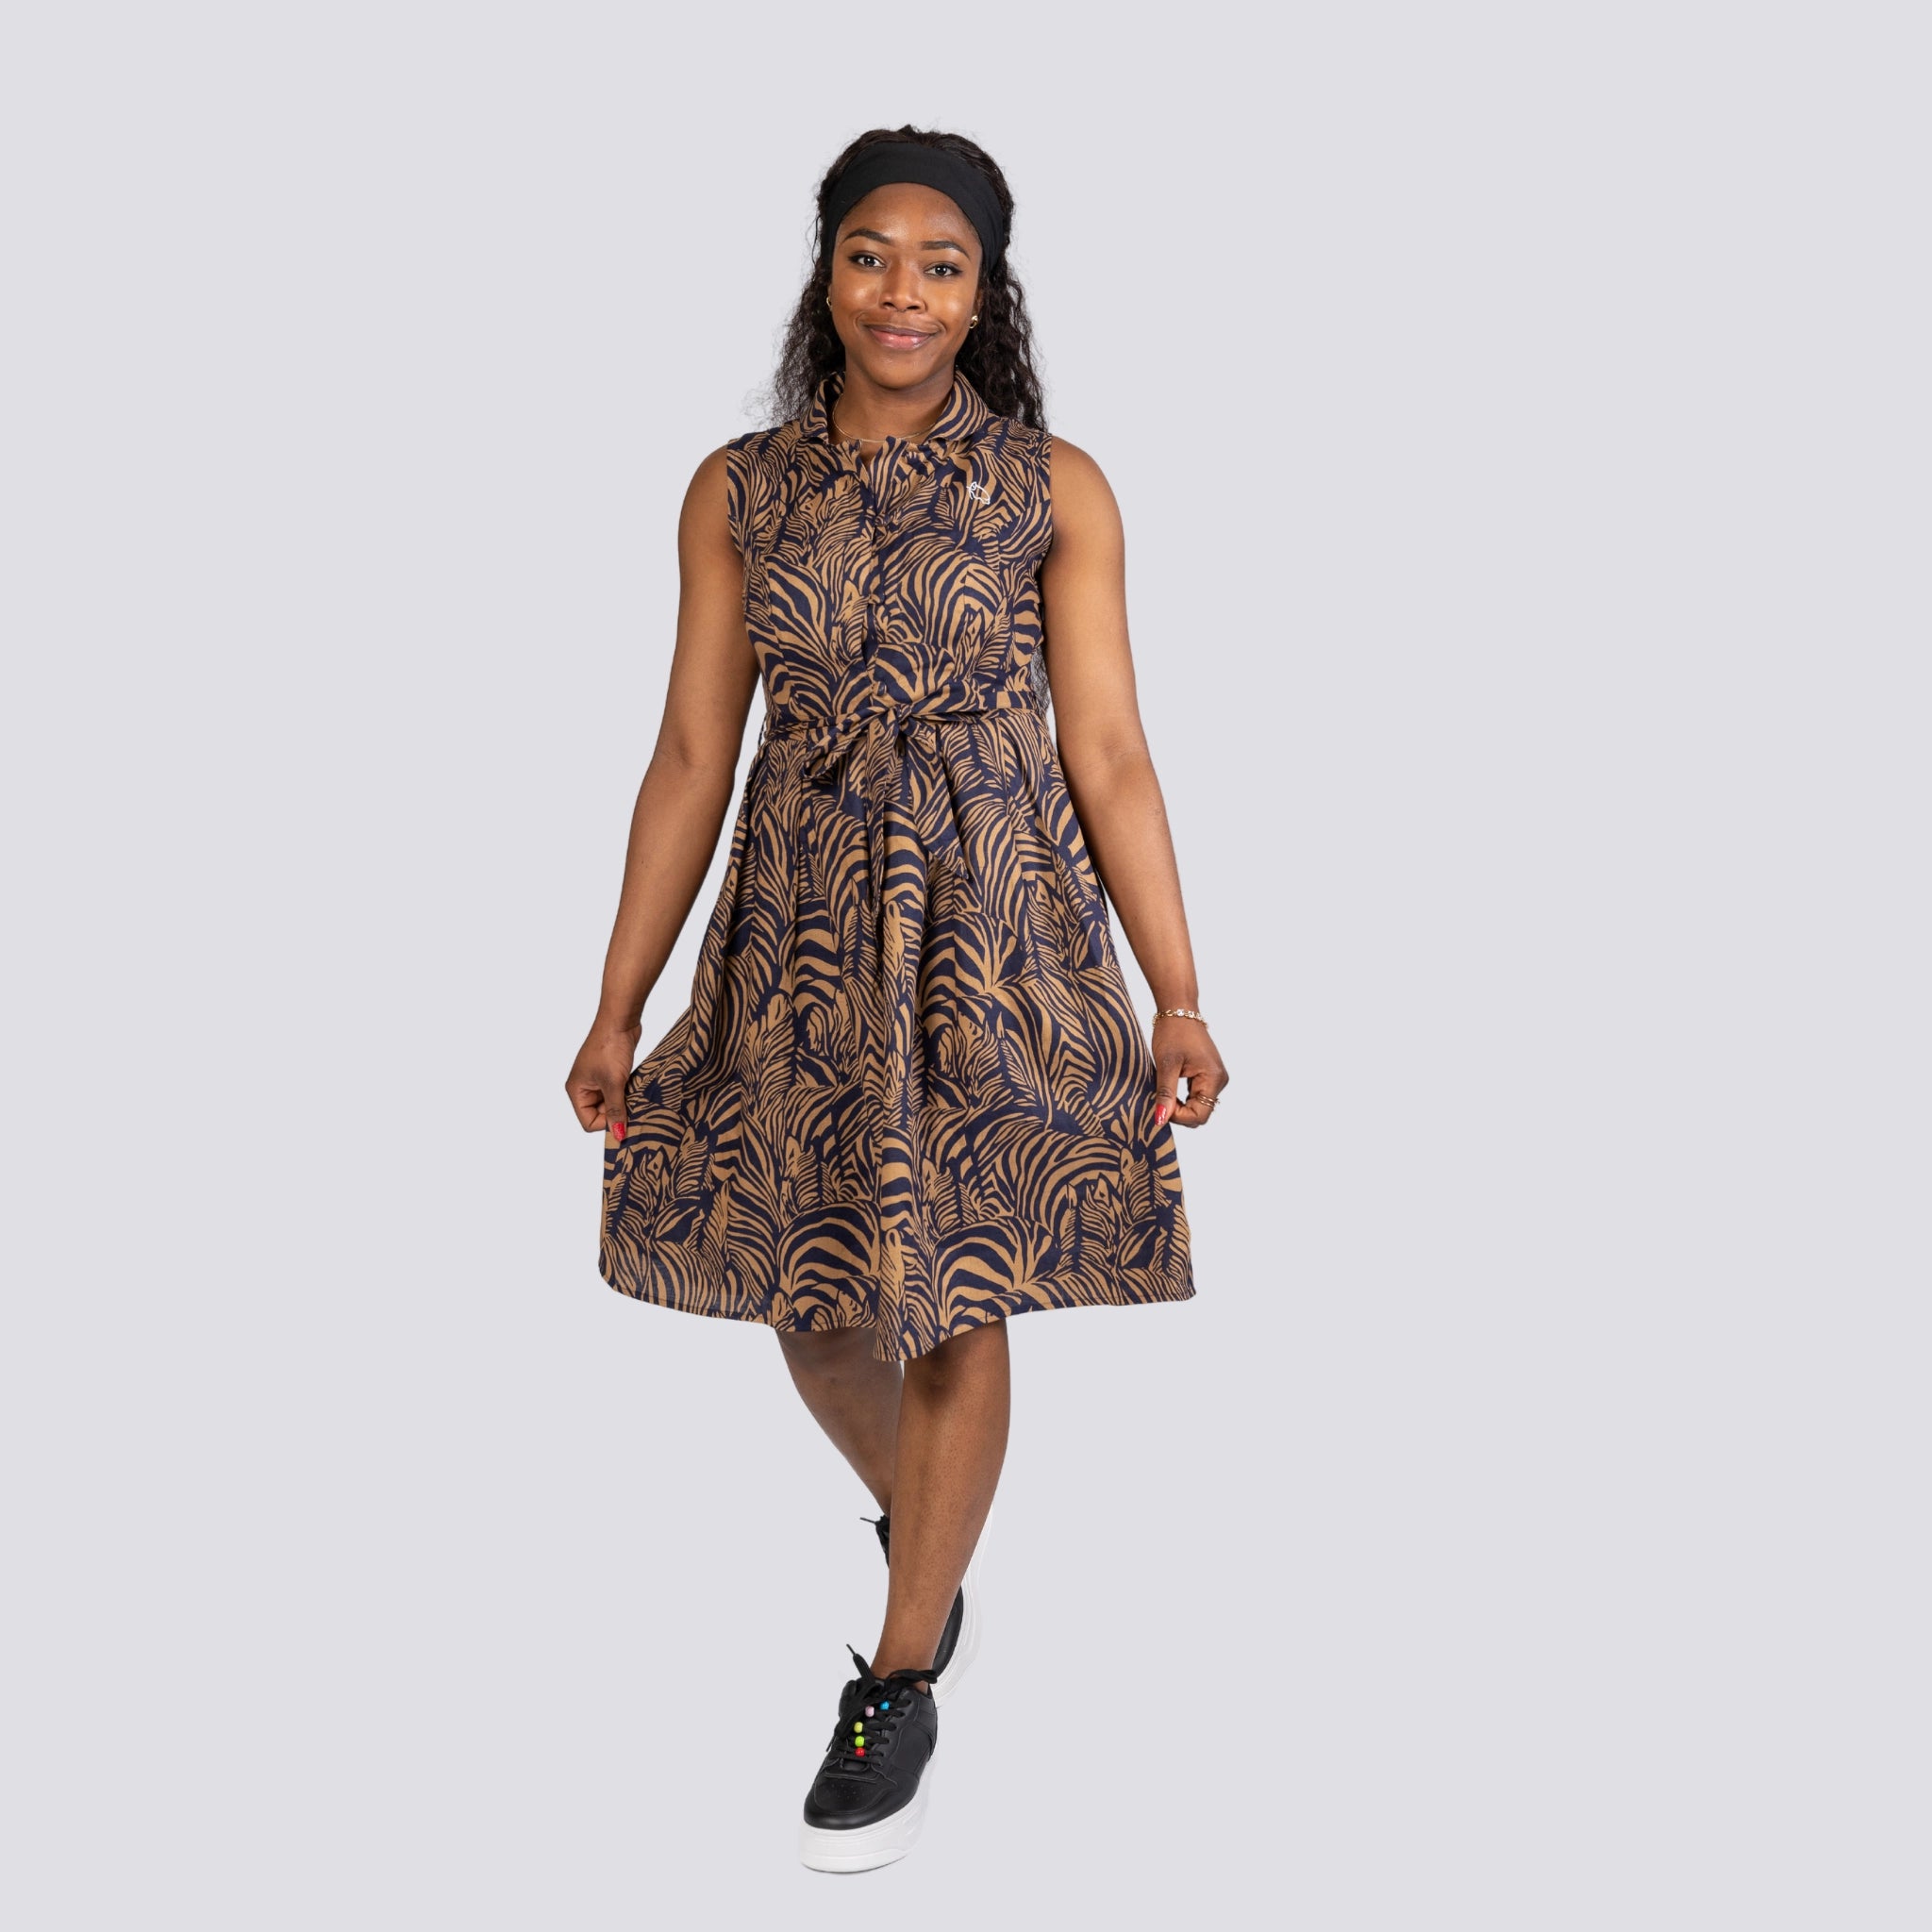 A woman in a Karee Linen Enchantment Button-Up Midi Dress and sneakers standing confidently against a plain background.